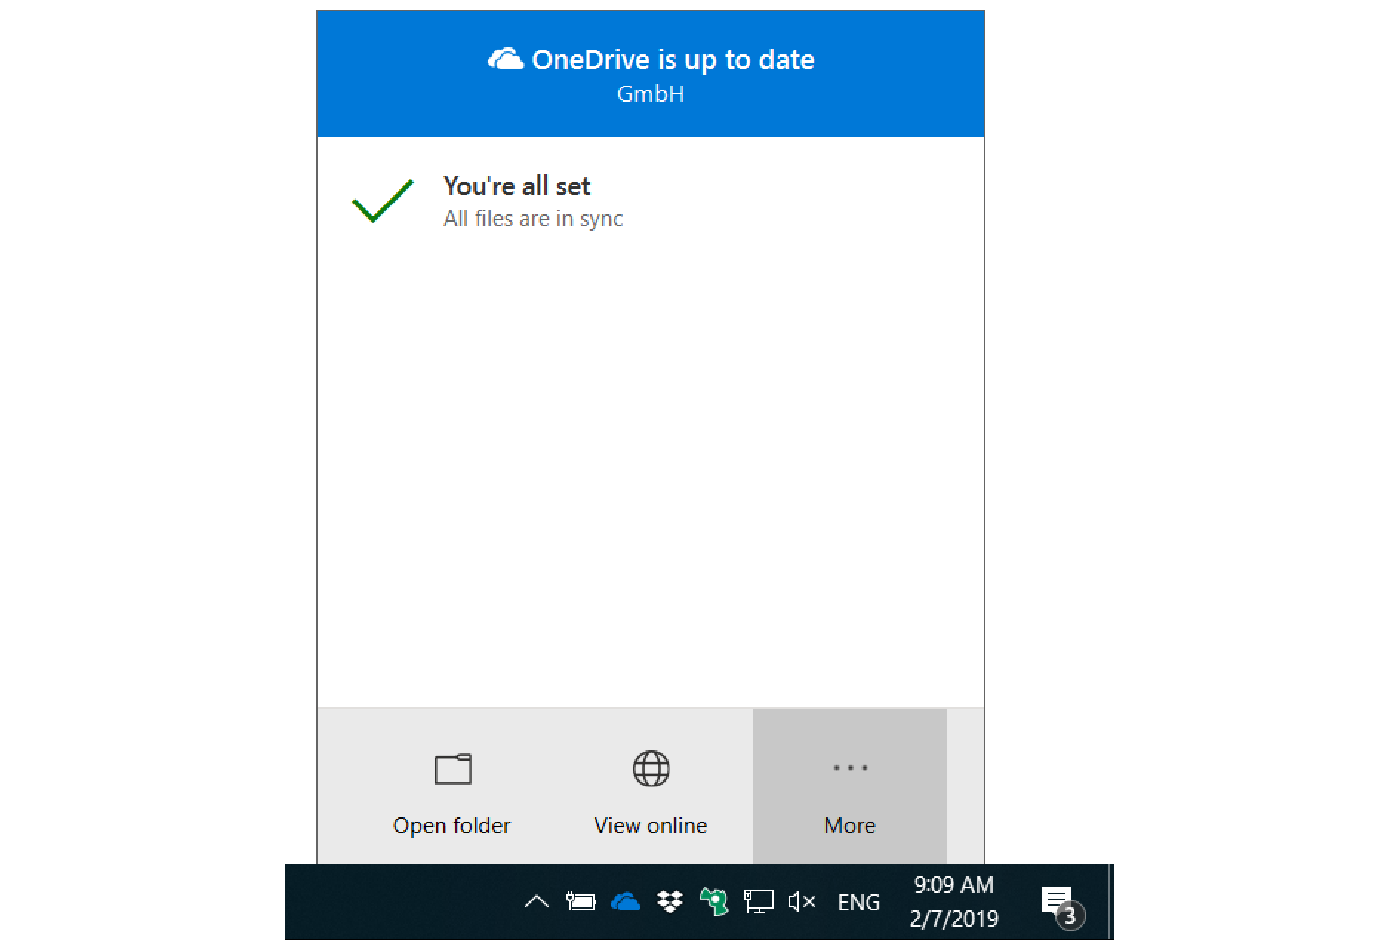 microsoft onedrive support contact